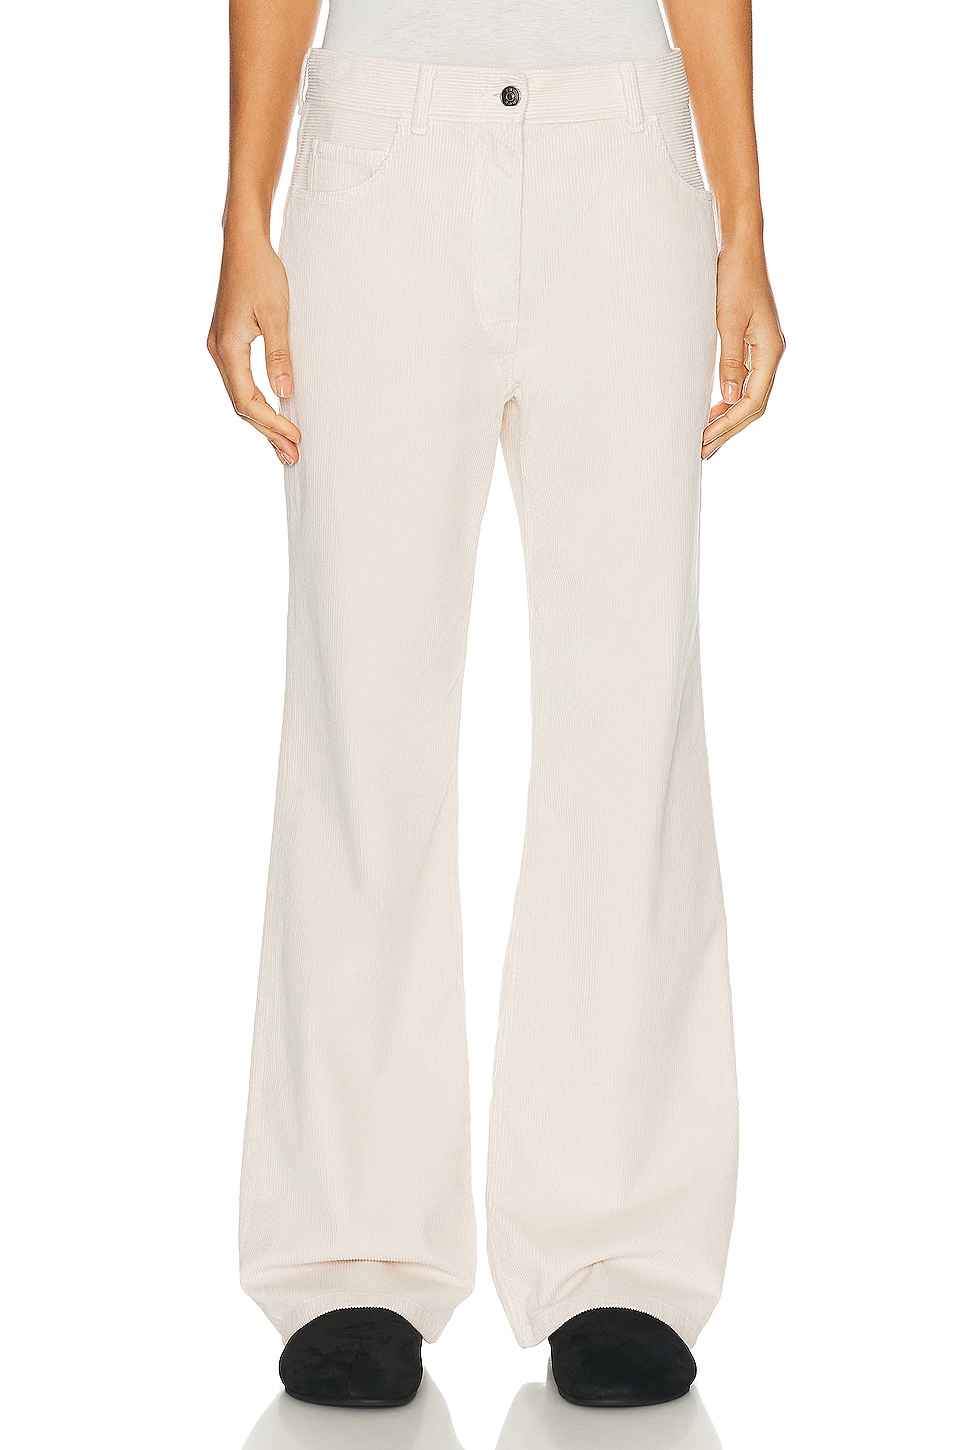 Image 1 of The Row Dan Pant in OFF WHITE